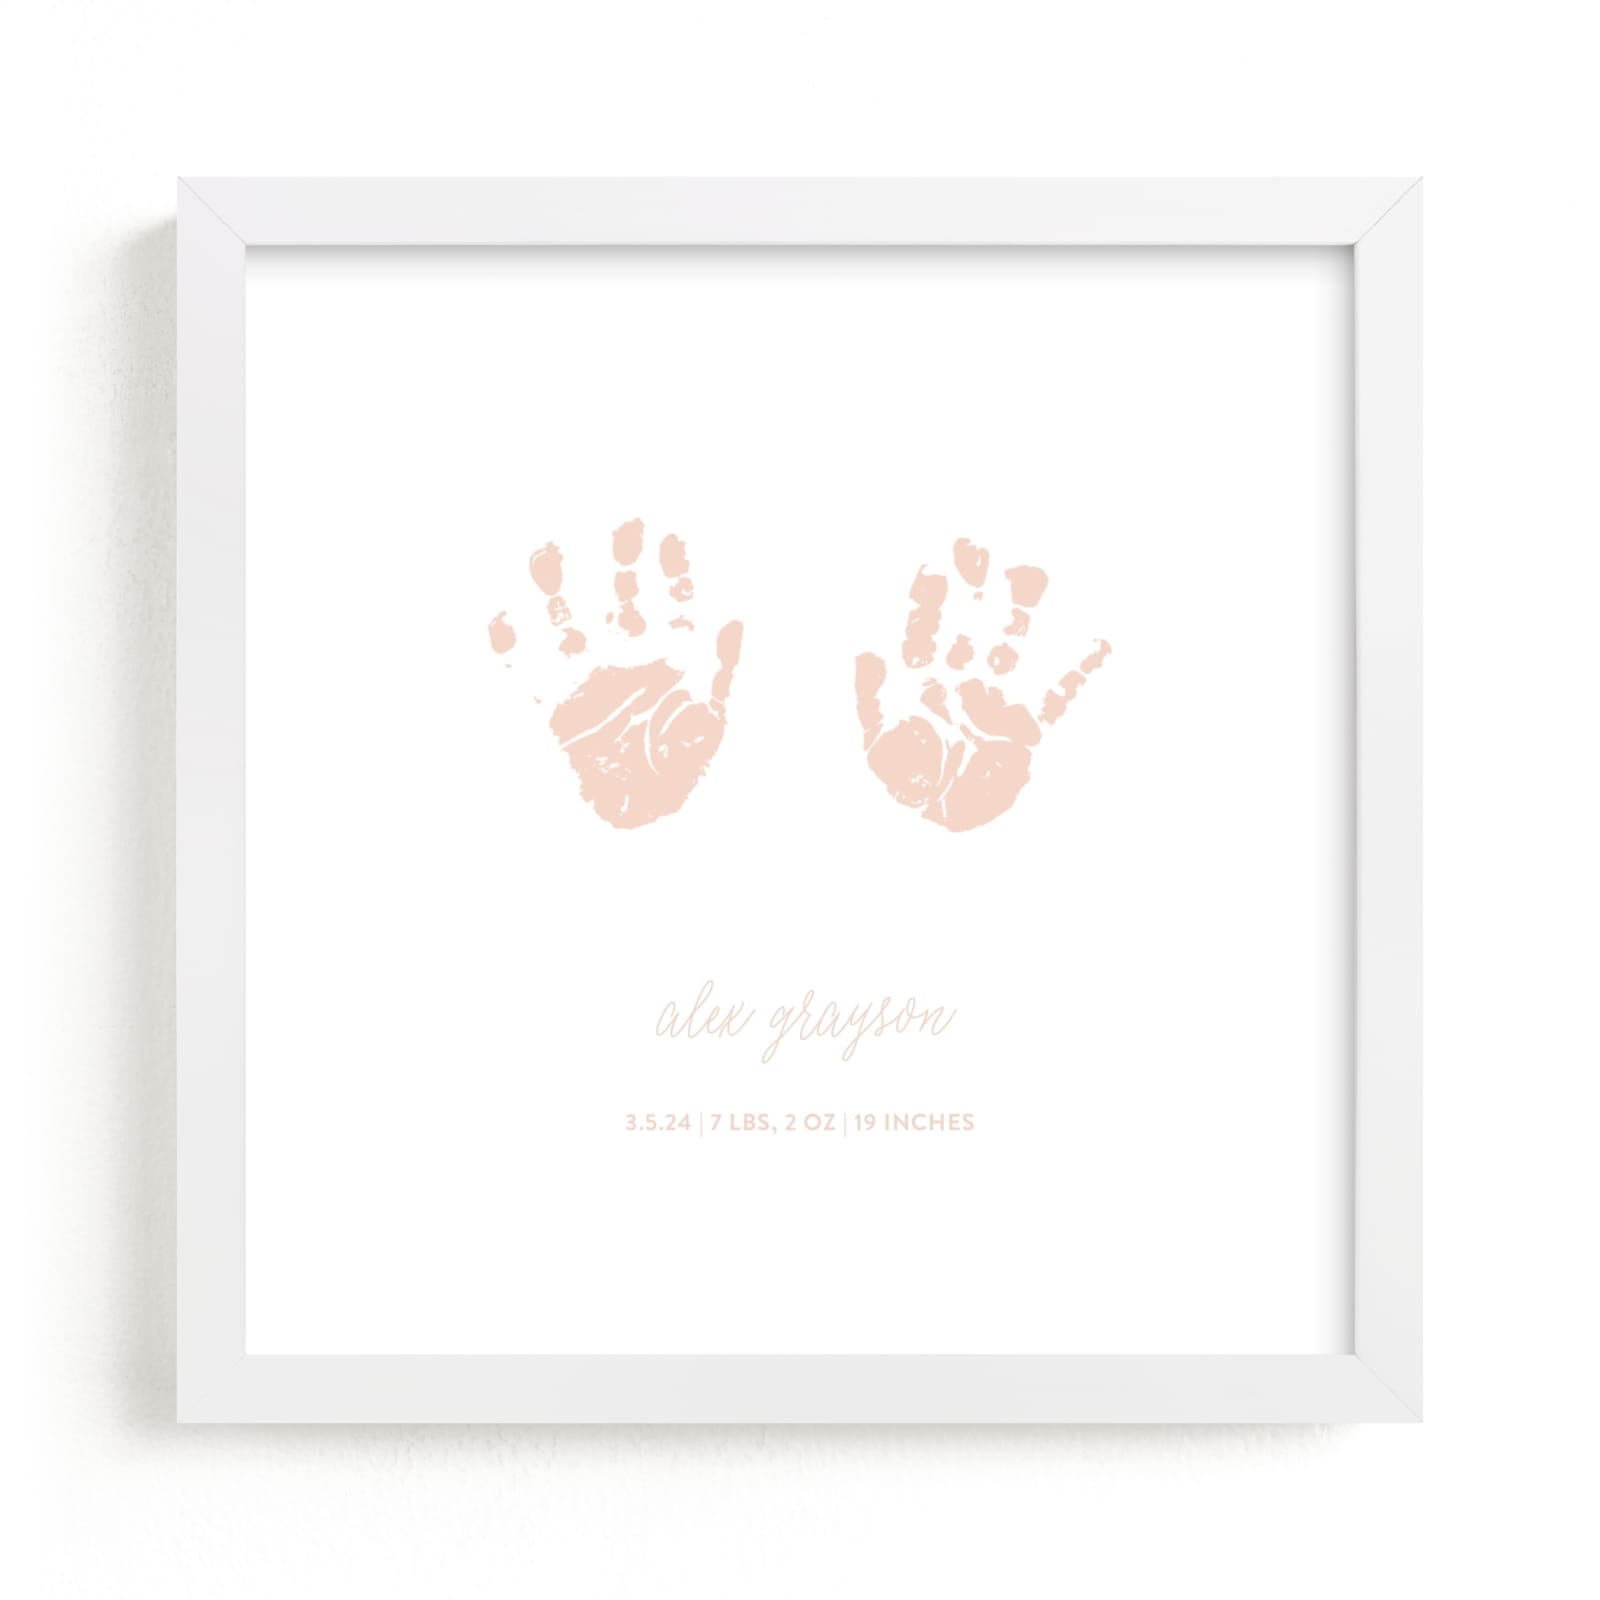 This is a pink photos to art by Minted called Custom Handprints as Art.